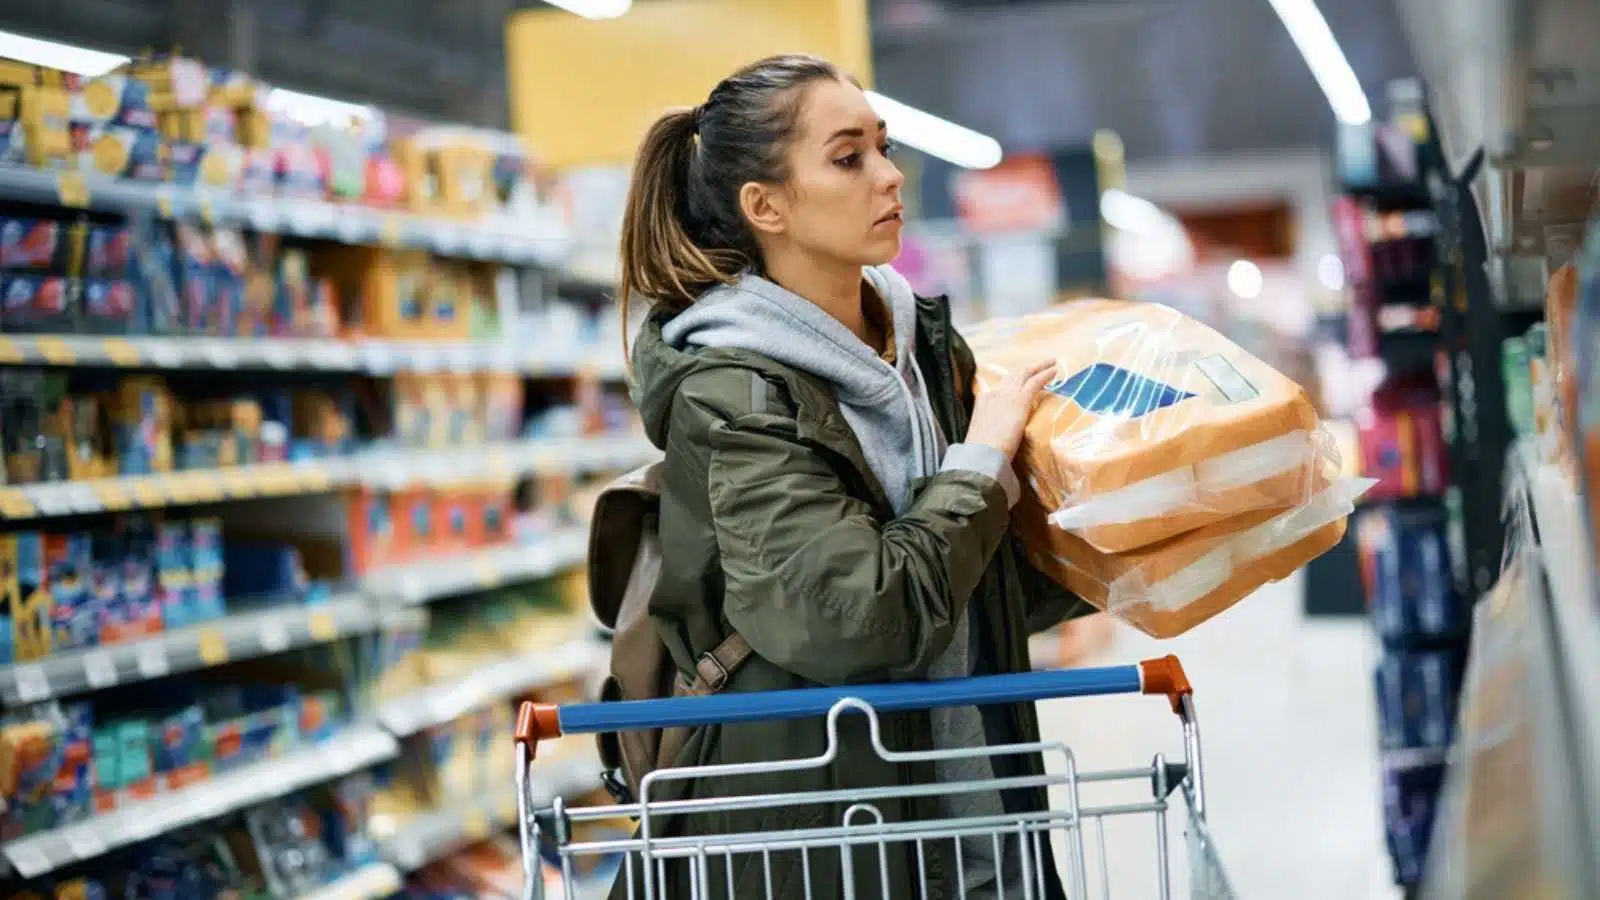 12 Habits Women Do That Are Seen As Wasteful (In Time and Money)